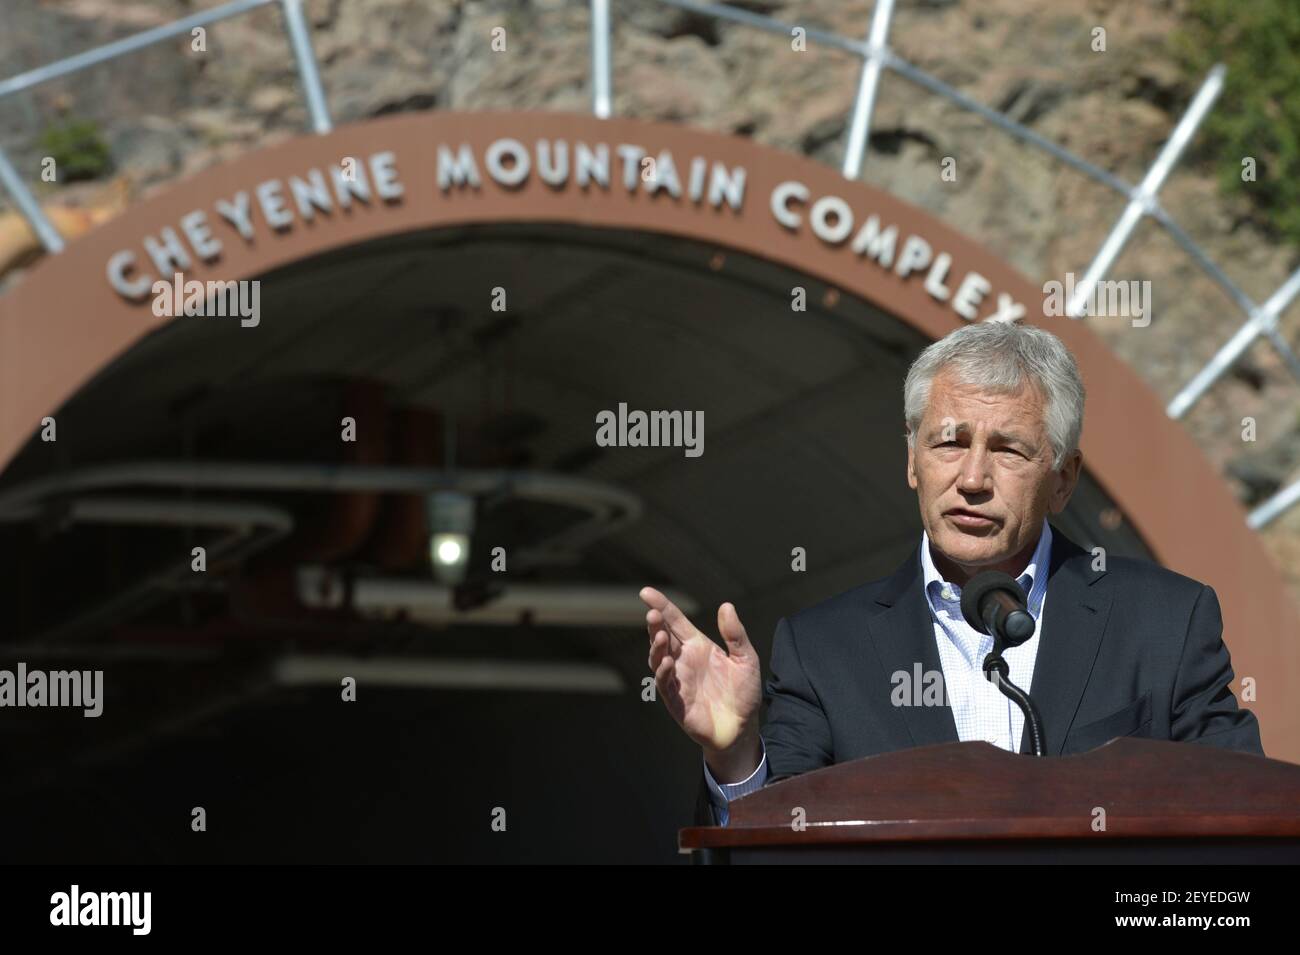 Secretary of Defense Chuck Hagel addresses the local press outside the entrance of Cheyenne Mountain Air Force Station as he visits USNORTHCOM in Colorado Springs, Col., June 28, 2013. (Photo by Glenn Fawcett/DoD/Sipa USA) Stock Photo